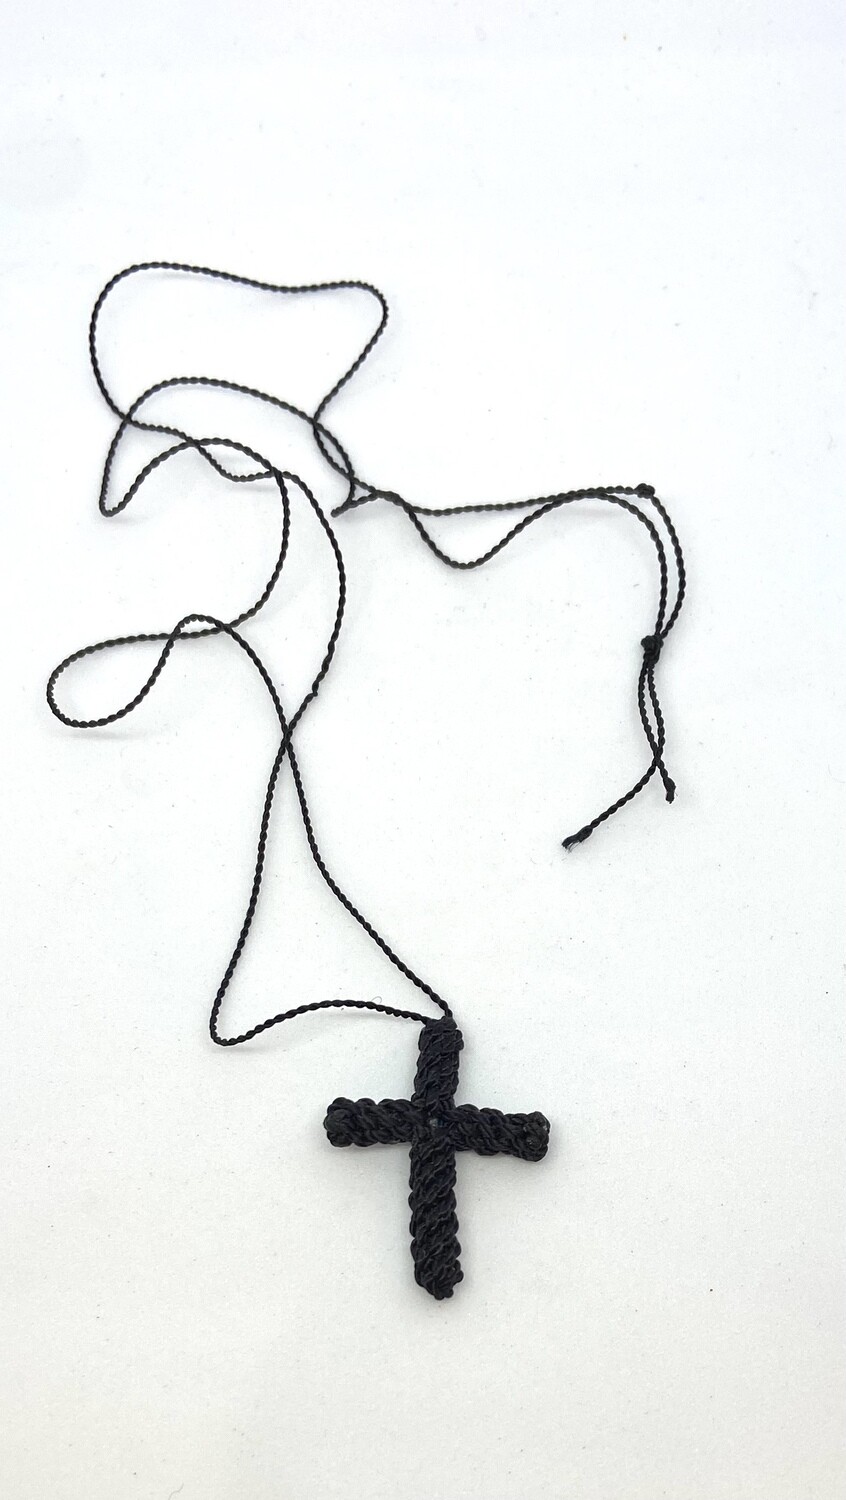 Knitted Wax Thread Cross Necklace